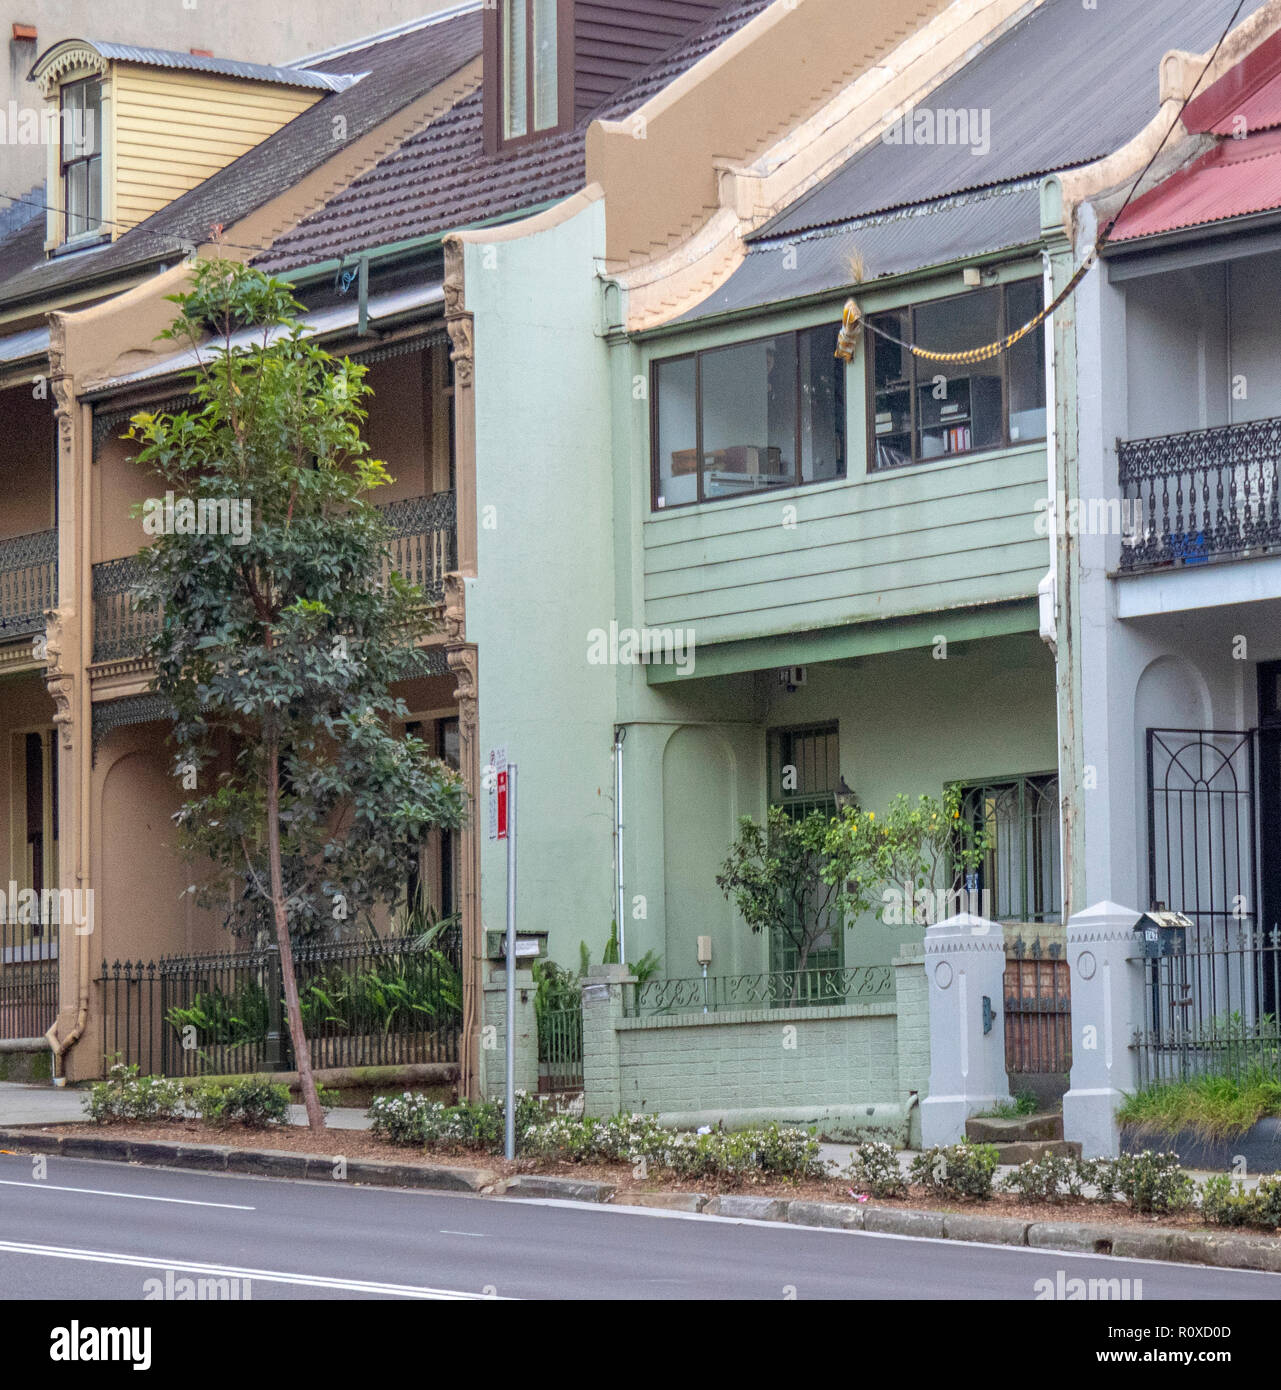 Row of terraced houses example of colonial architecture Darlinghurst Sydney NSW Australia. Stock Photo